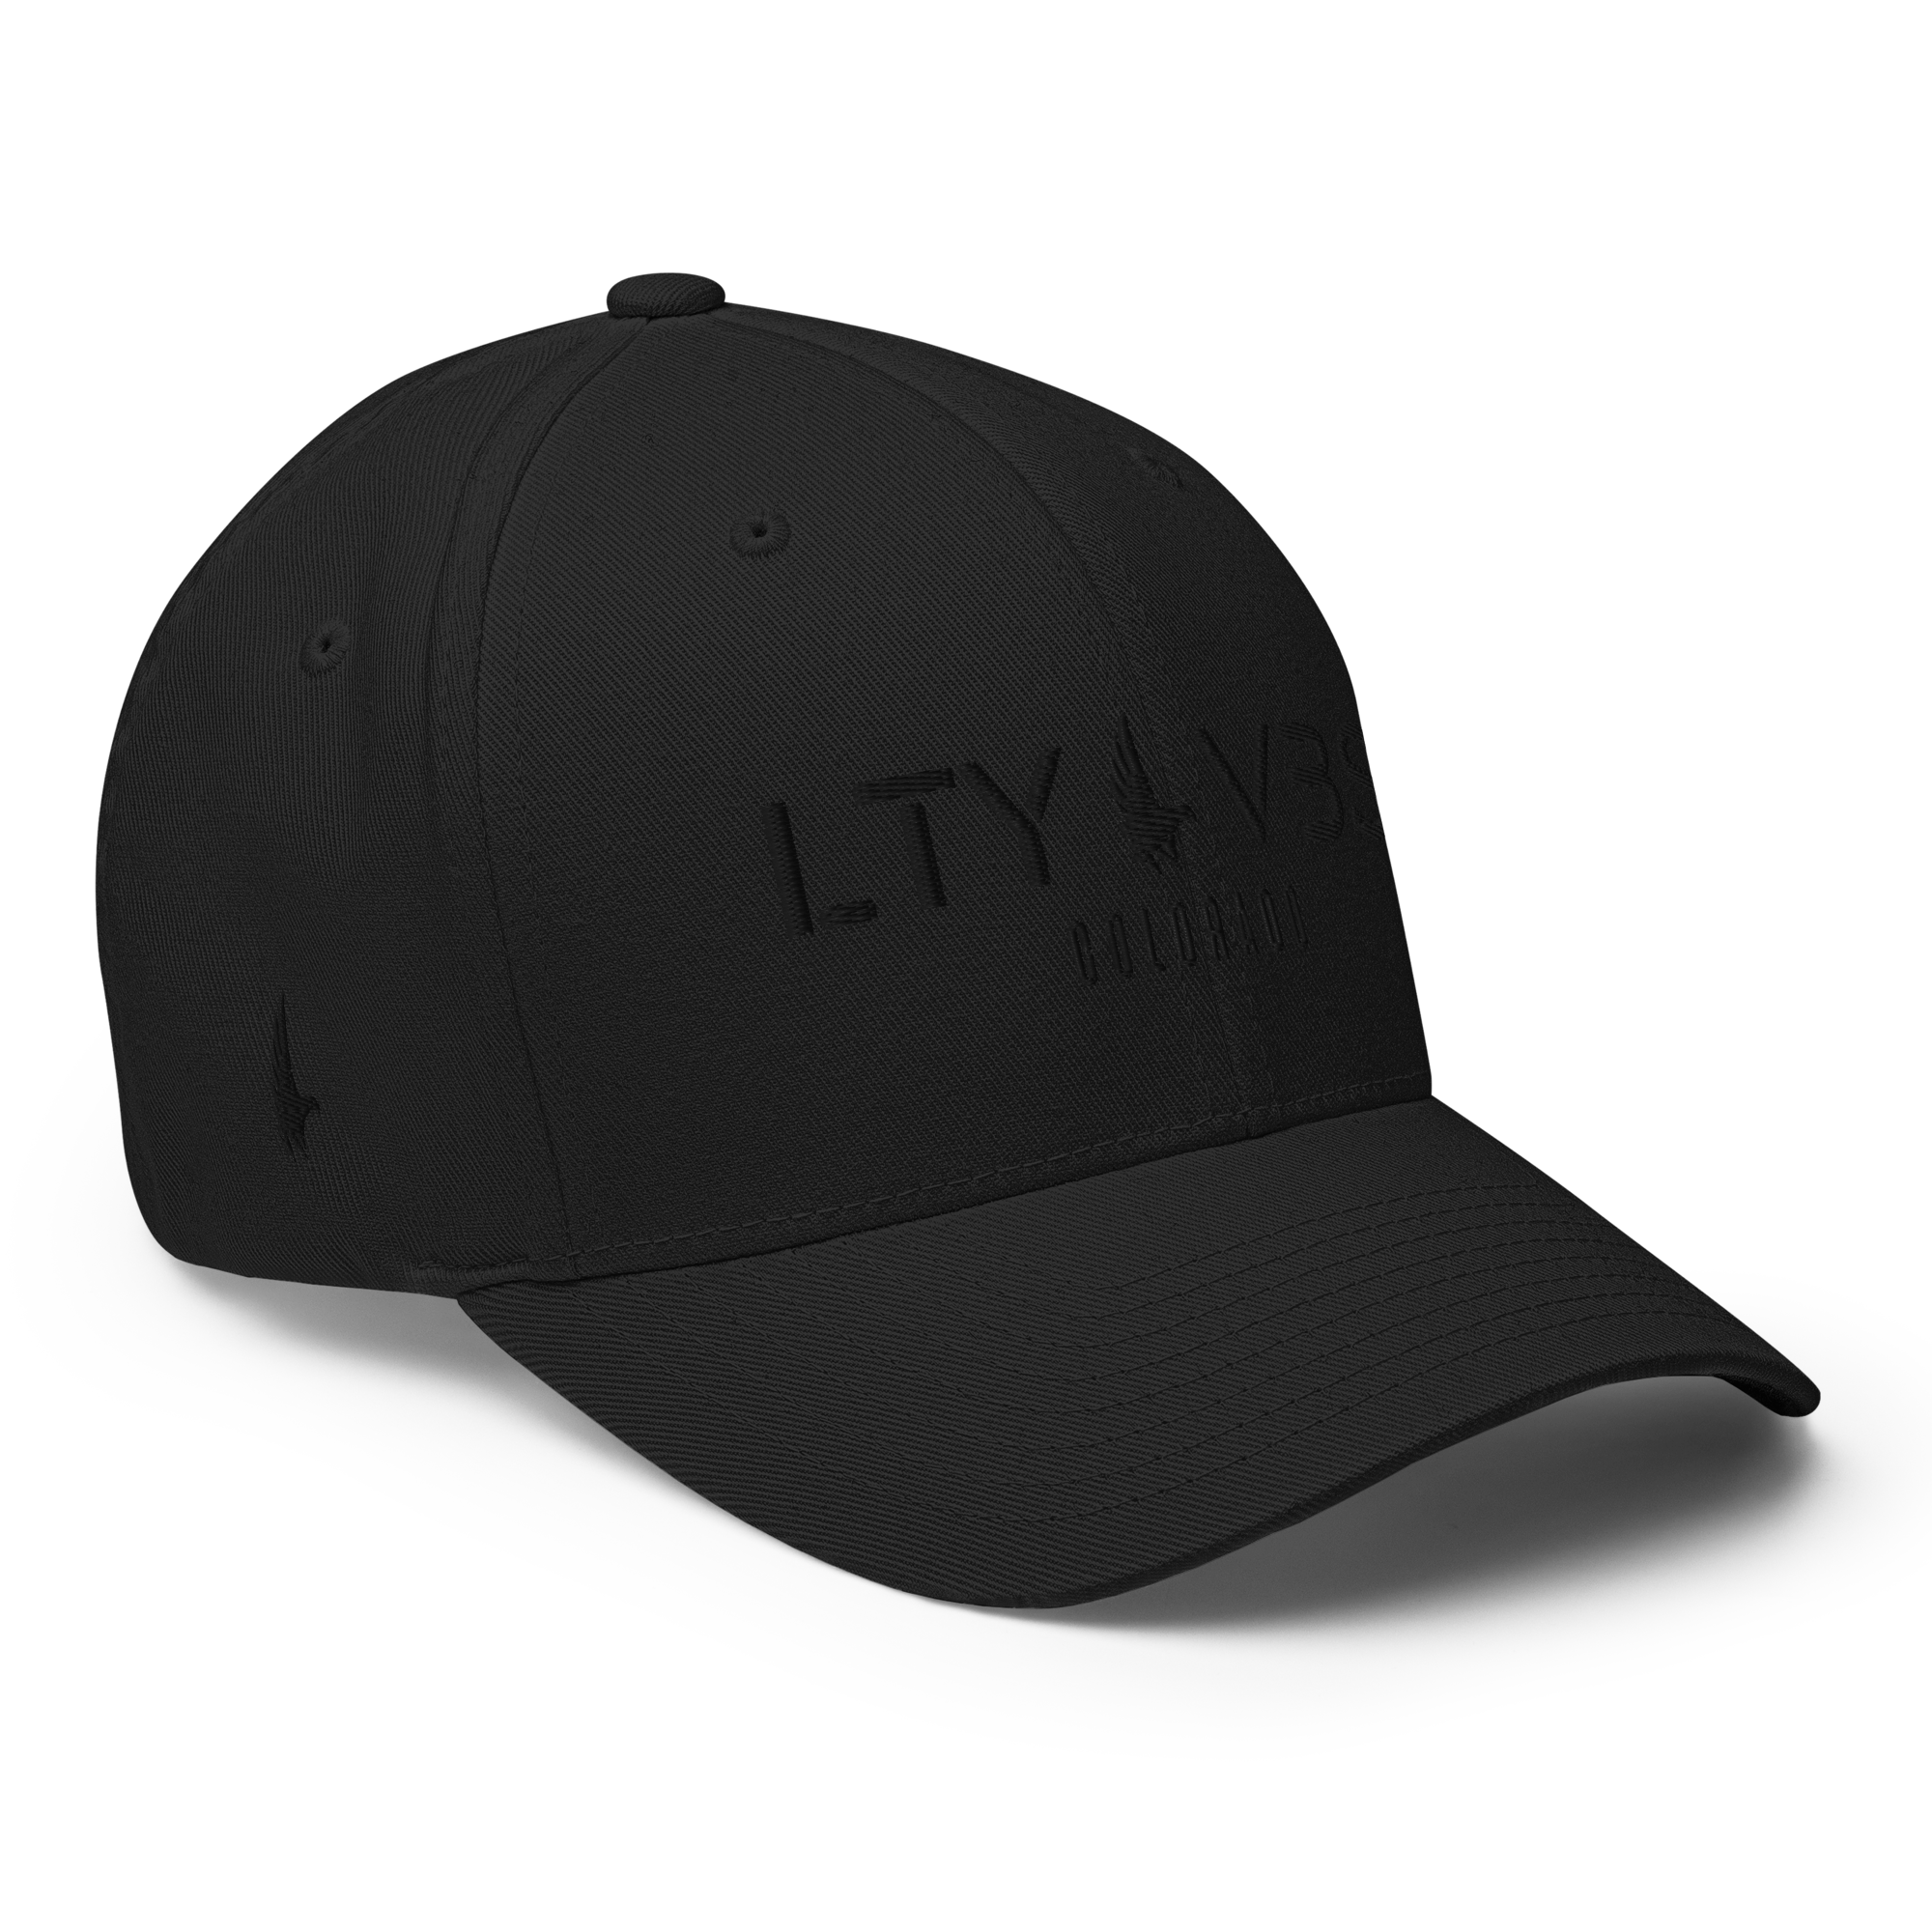 Loyalty Era Colorado Fitted Hat - Black / Black Fitted - Loyalty Vibes